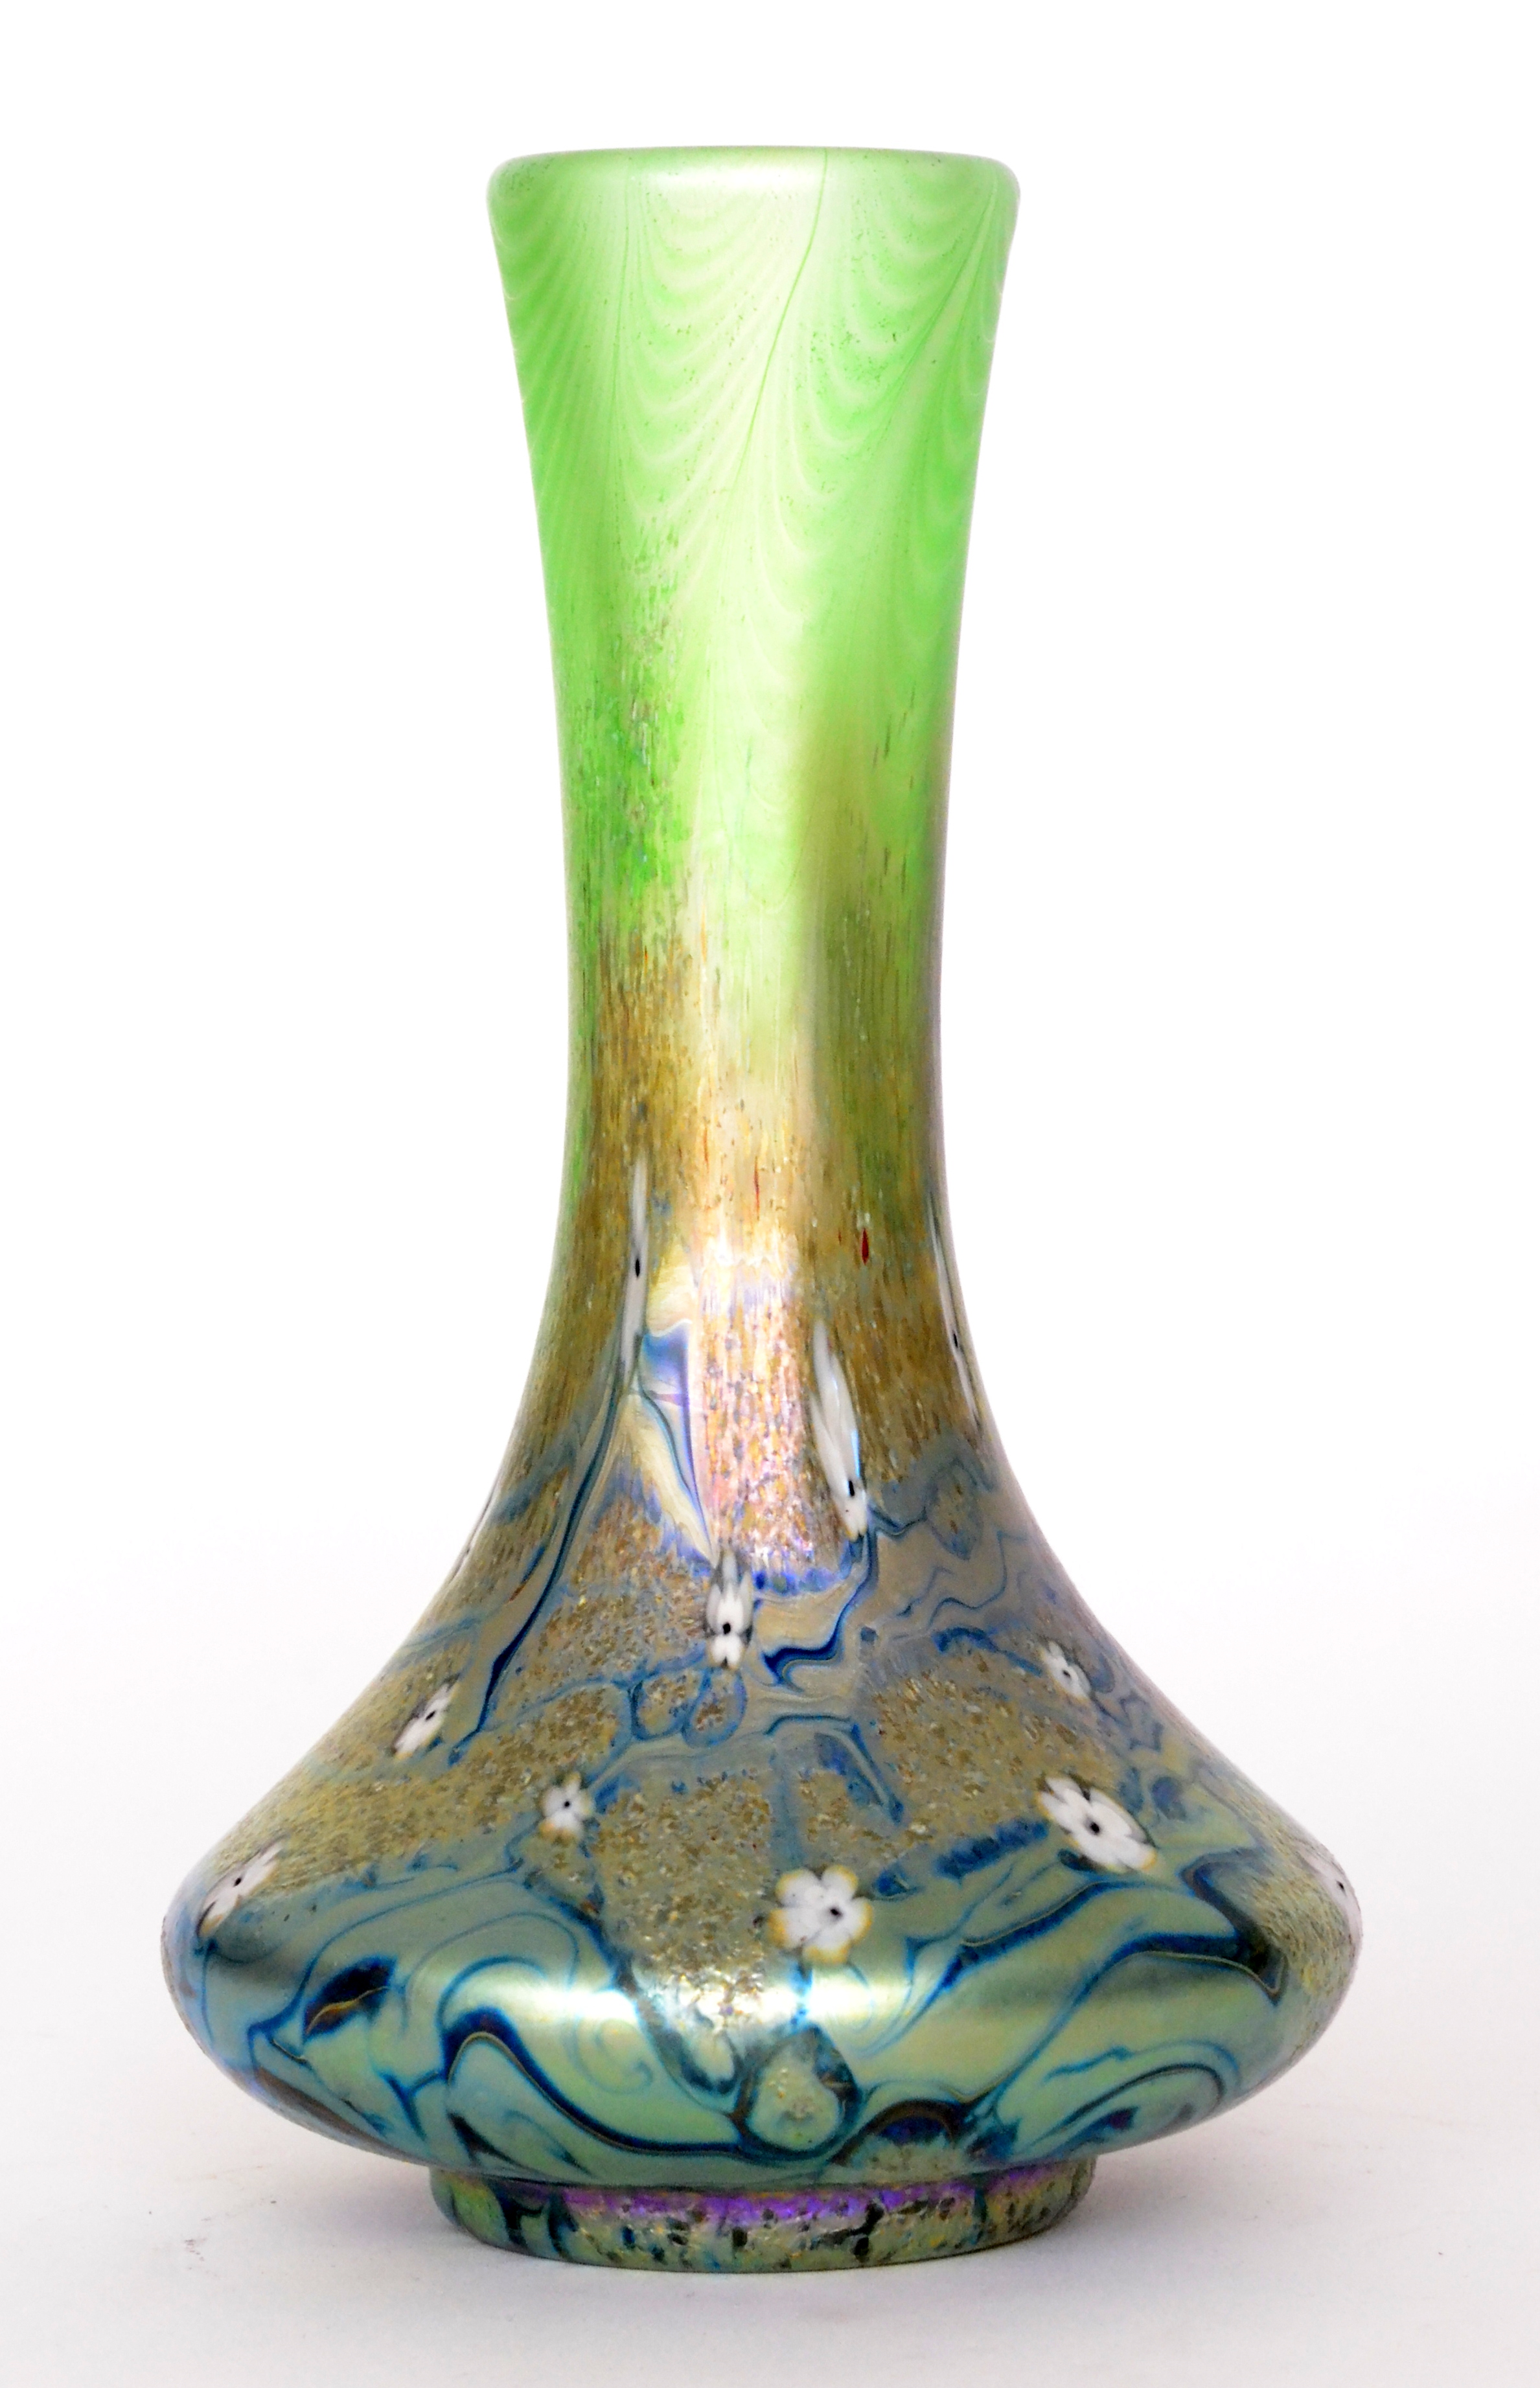 Dave Barras - Okra - A studio glass vase of compressed globe and shaft form decorated with blossom